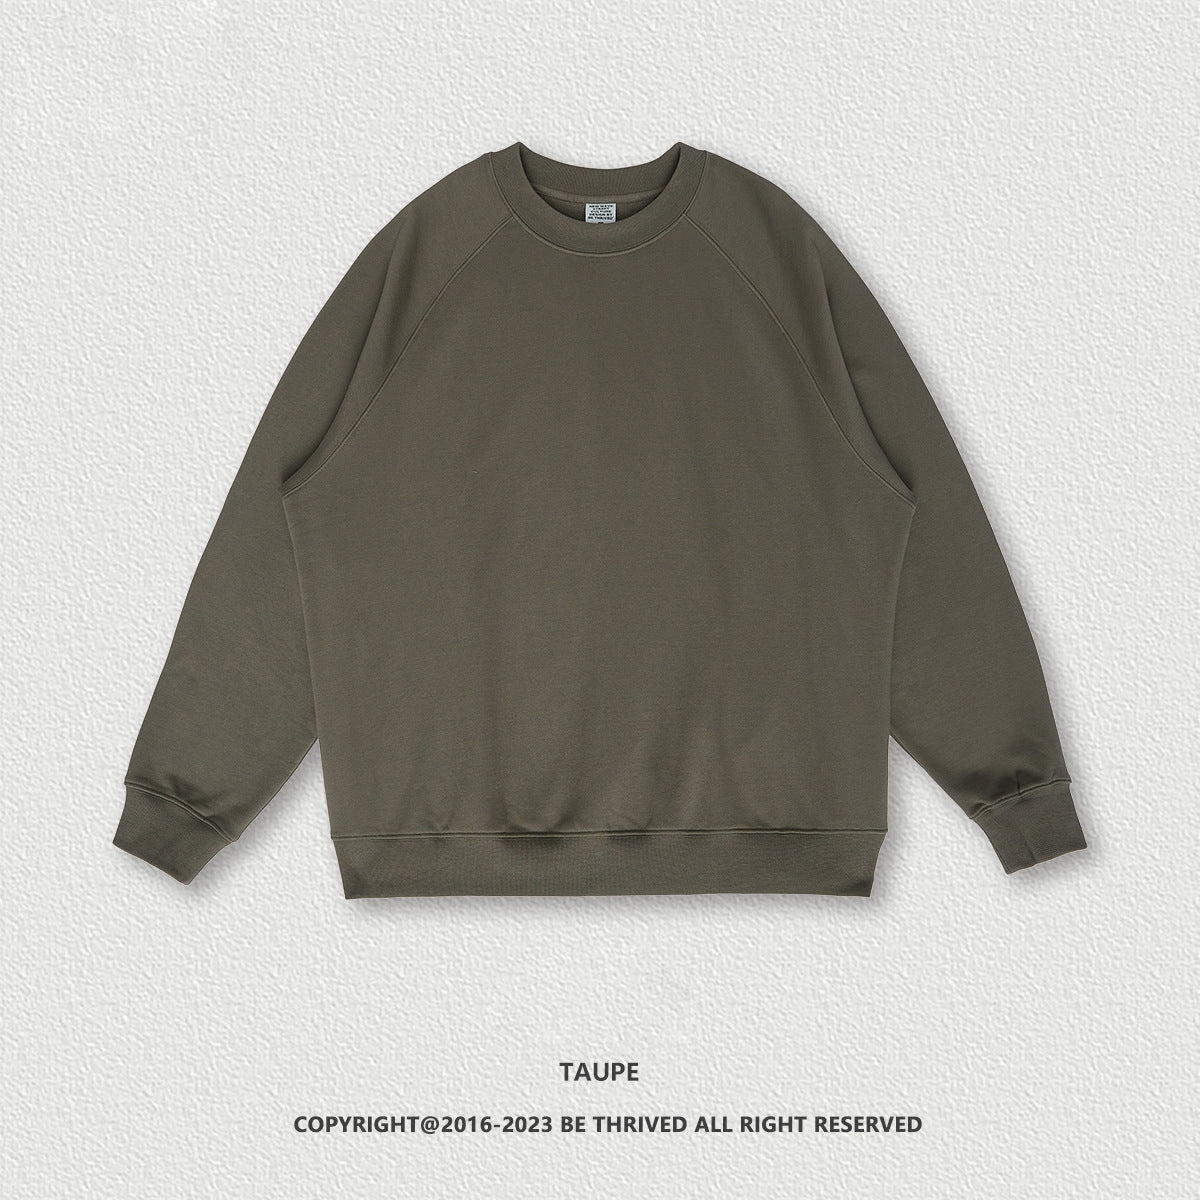 W0009 445GSM Autumn American fashion brand horn sleeve hoodies earth color loose solid color round neck sweatshirt men